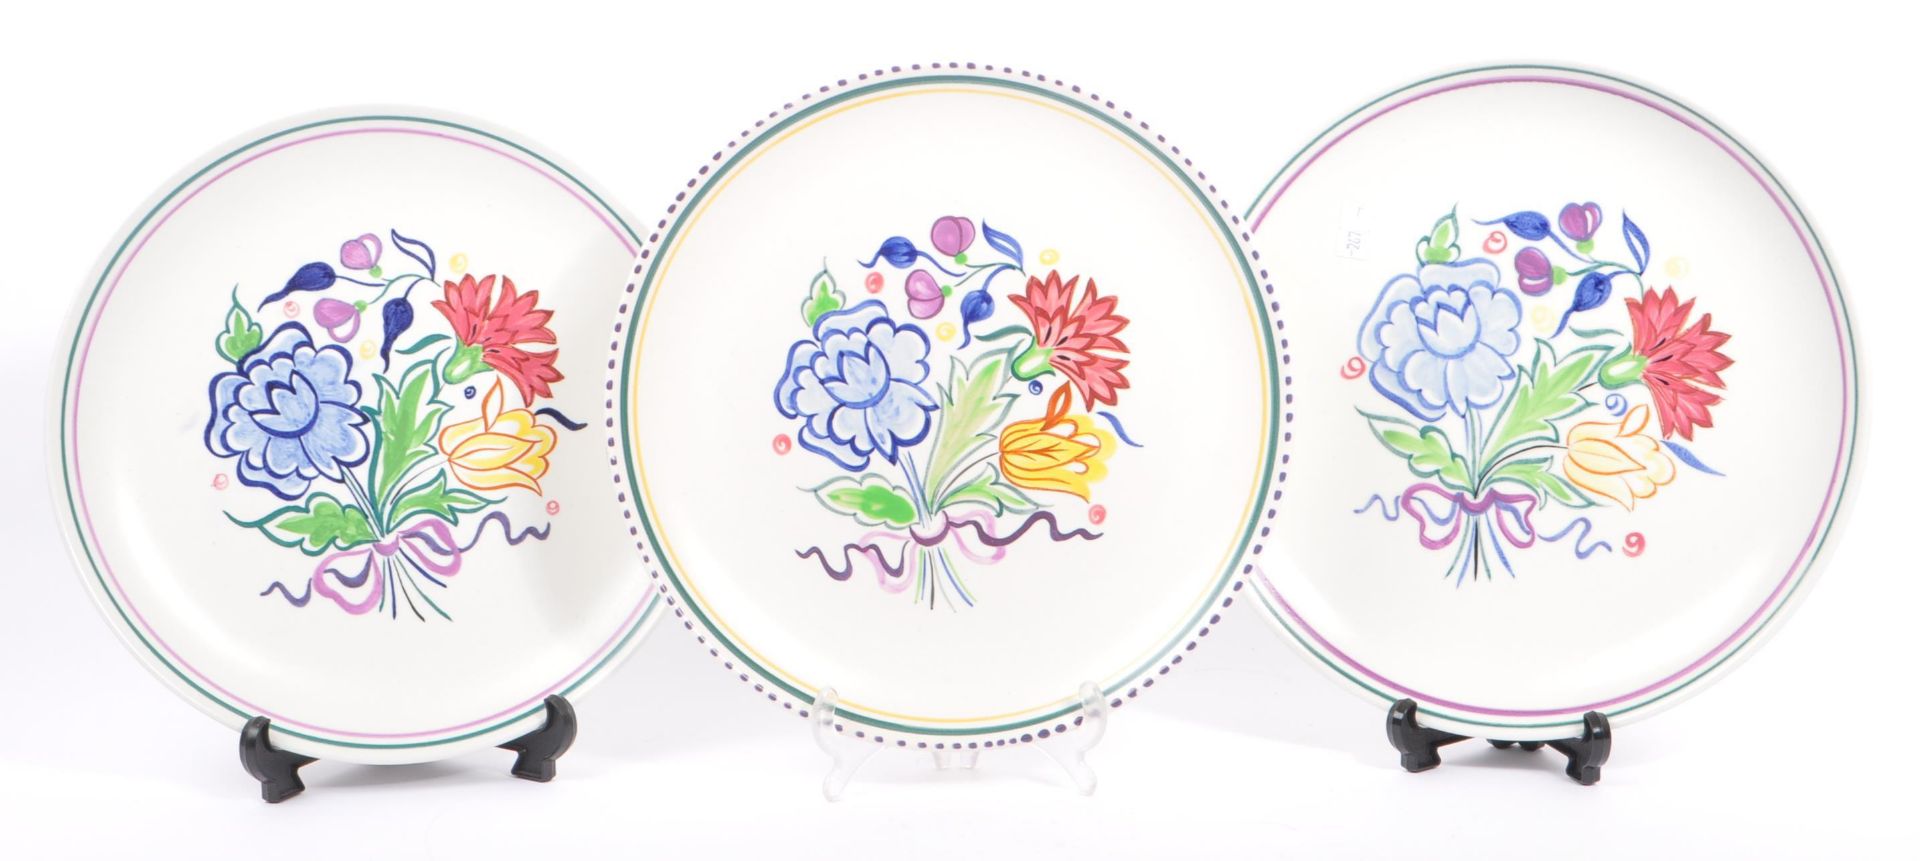 POOLE POTTERY - COLLECTION OF THREE CERAMIC PLATES